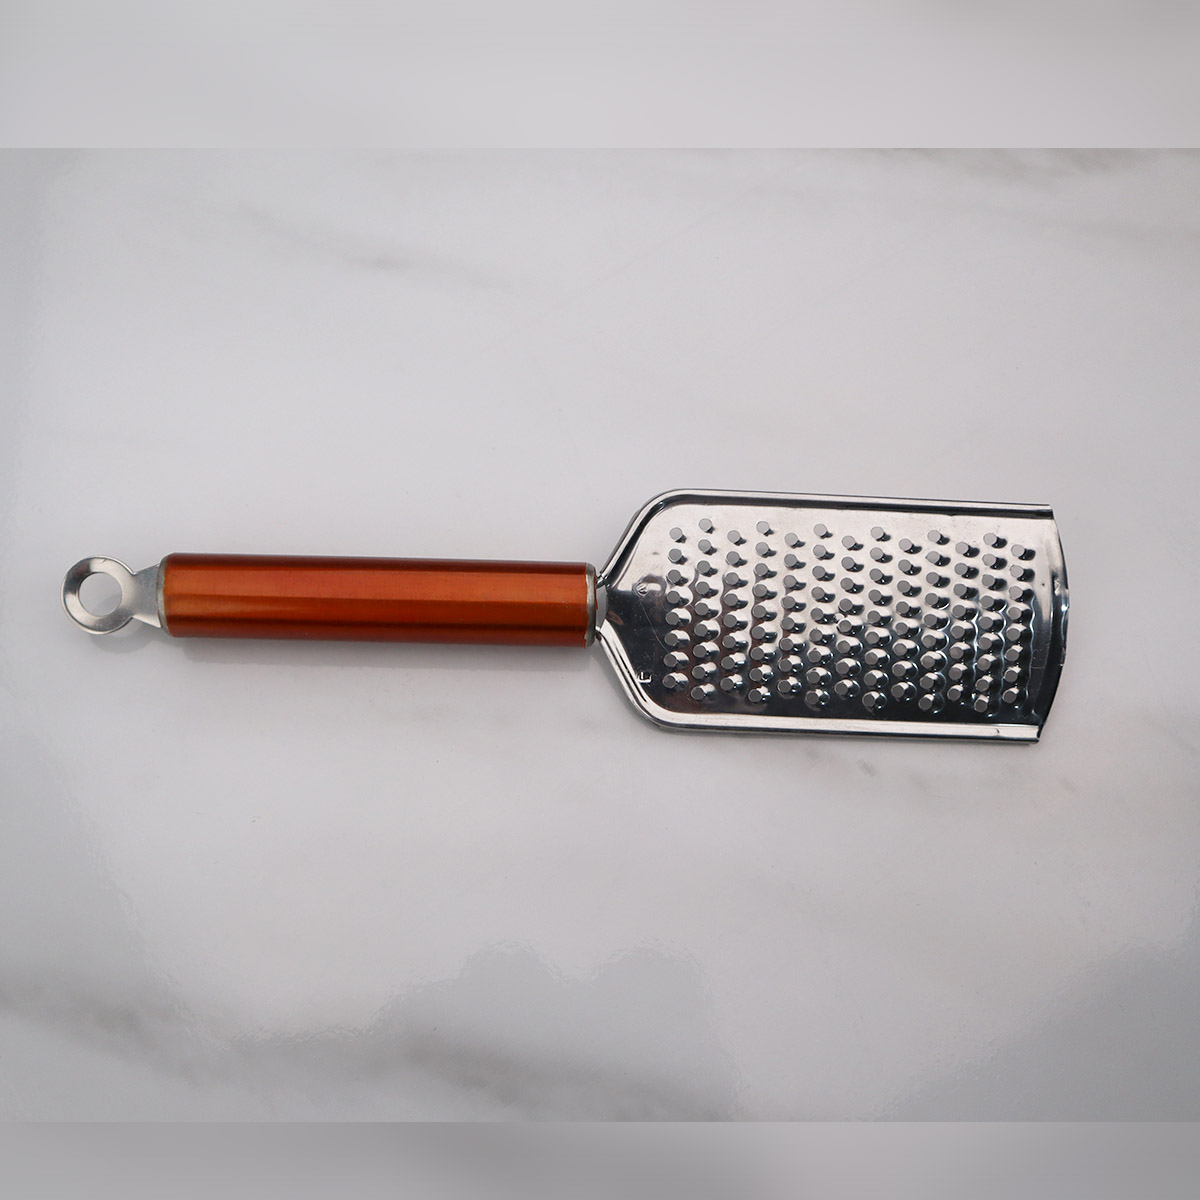 Chef Best Quality Stainless Steel Micro Blade Cheese Greater With Copper Handle, Handheld Grater